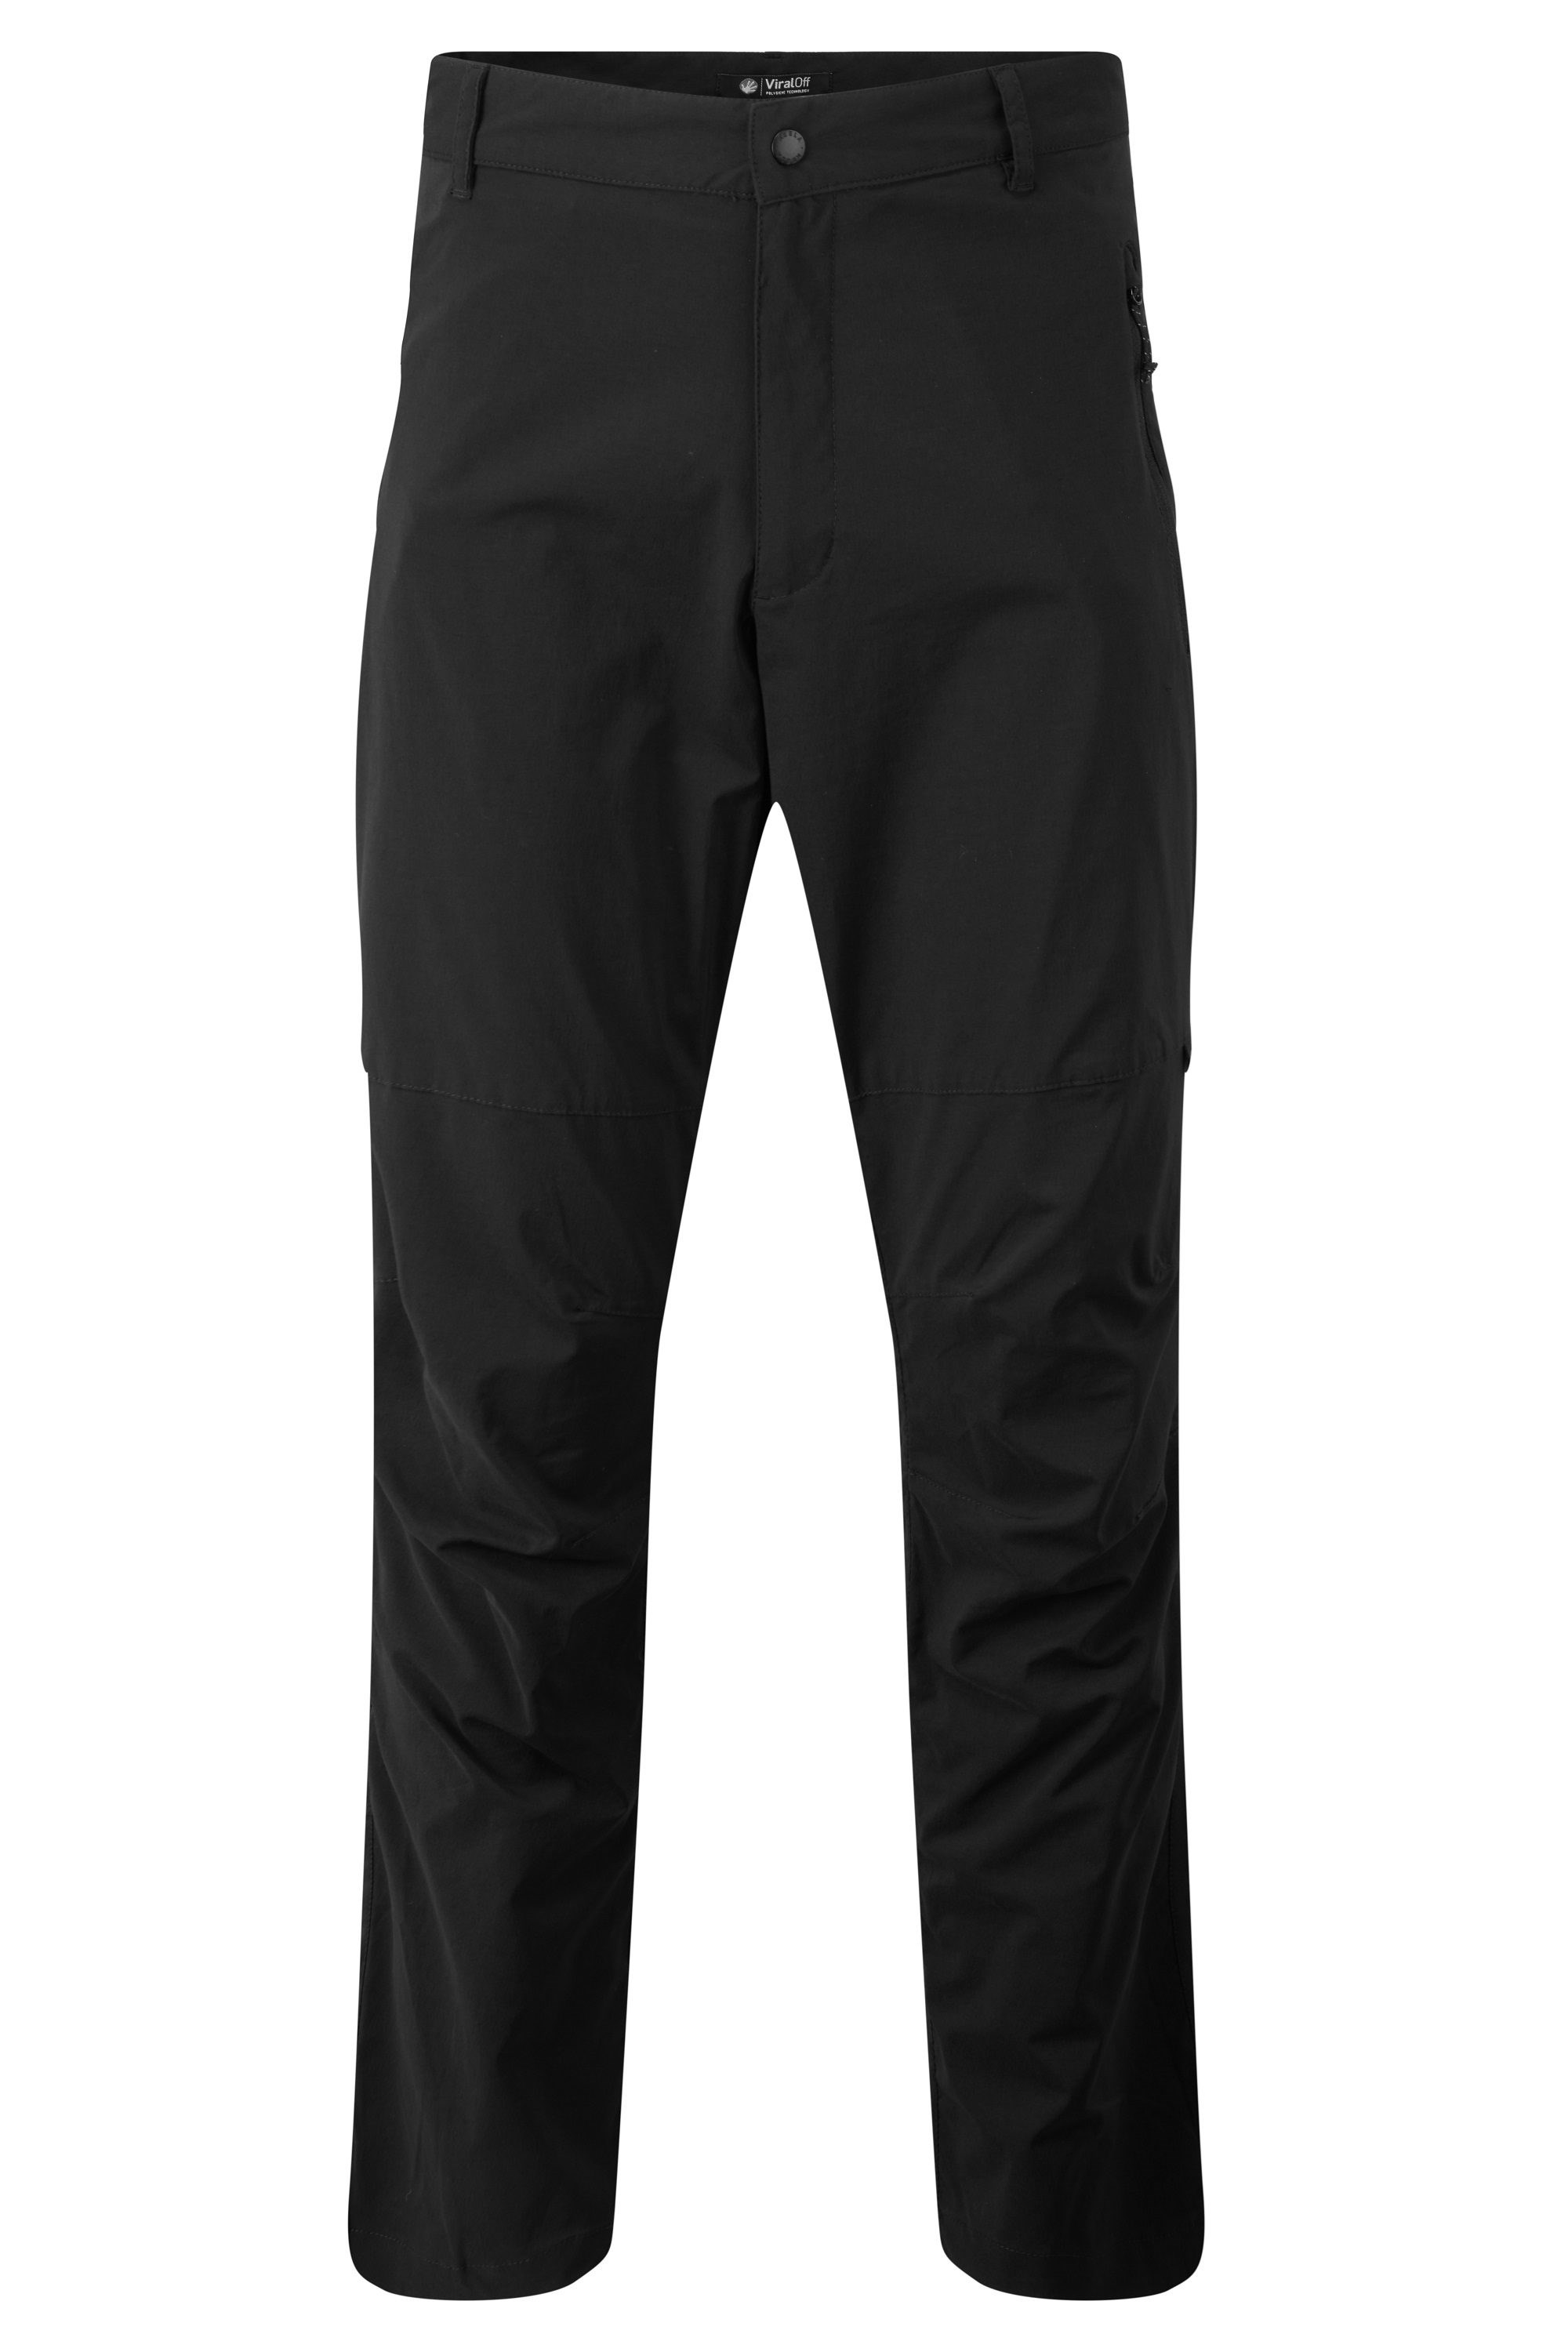 Mens Trail Trousers -